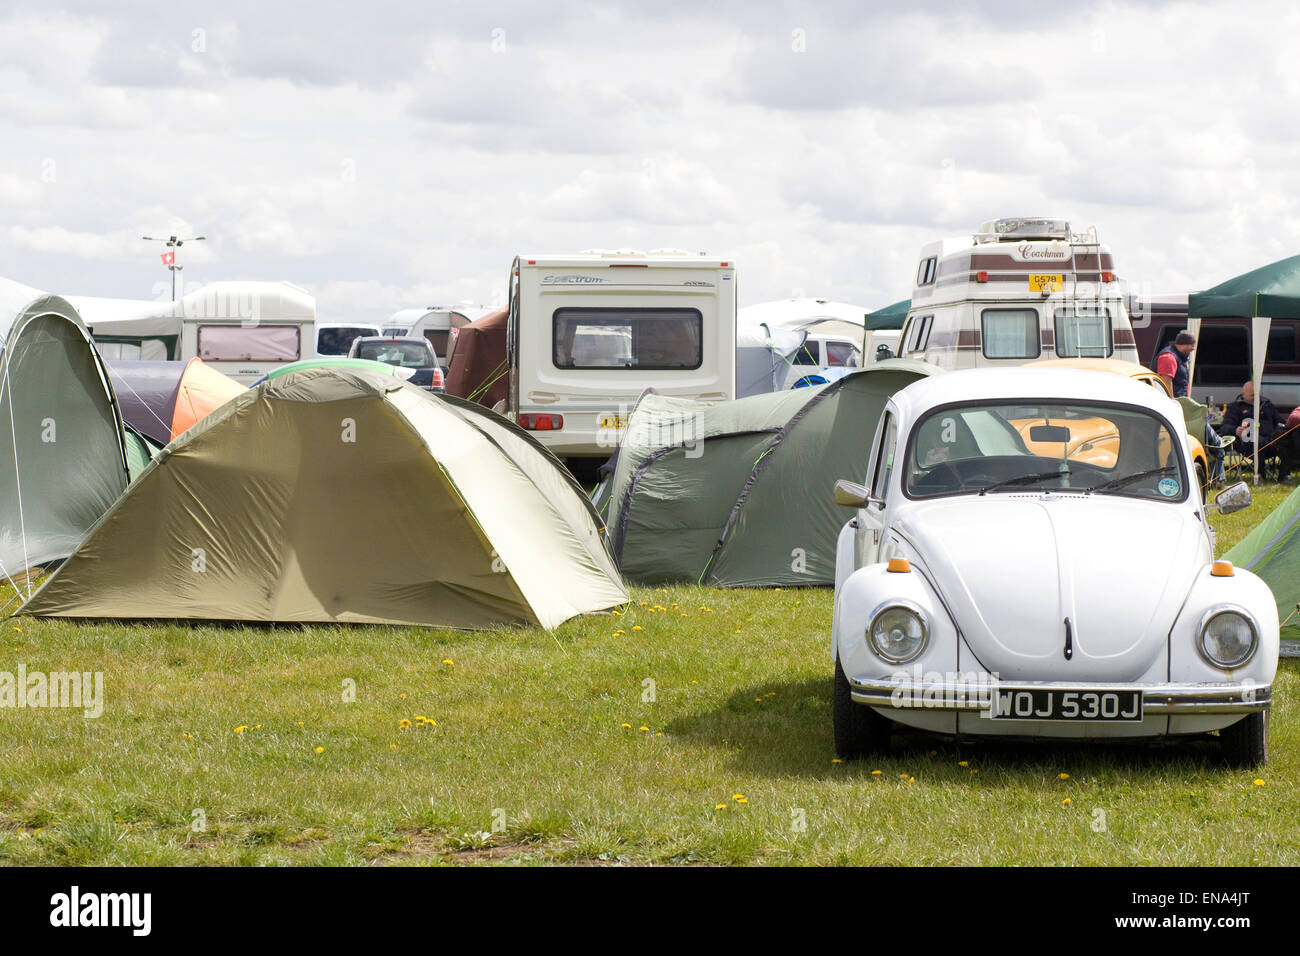 Camping ground at a Volkswagen Show in england Stock Photo